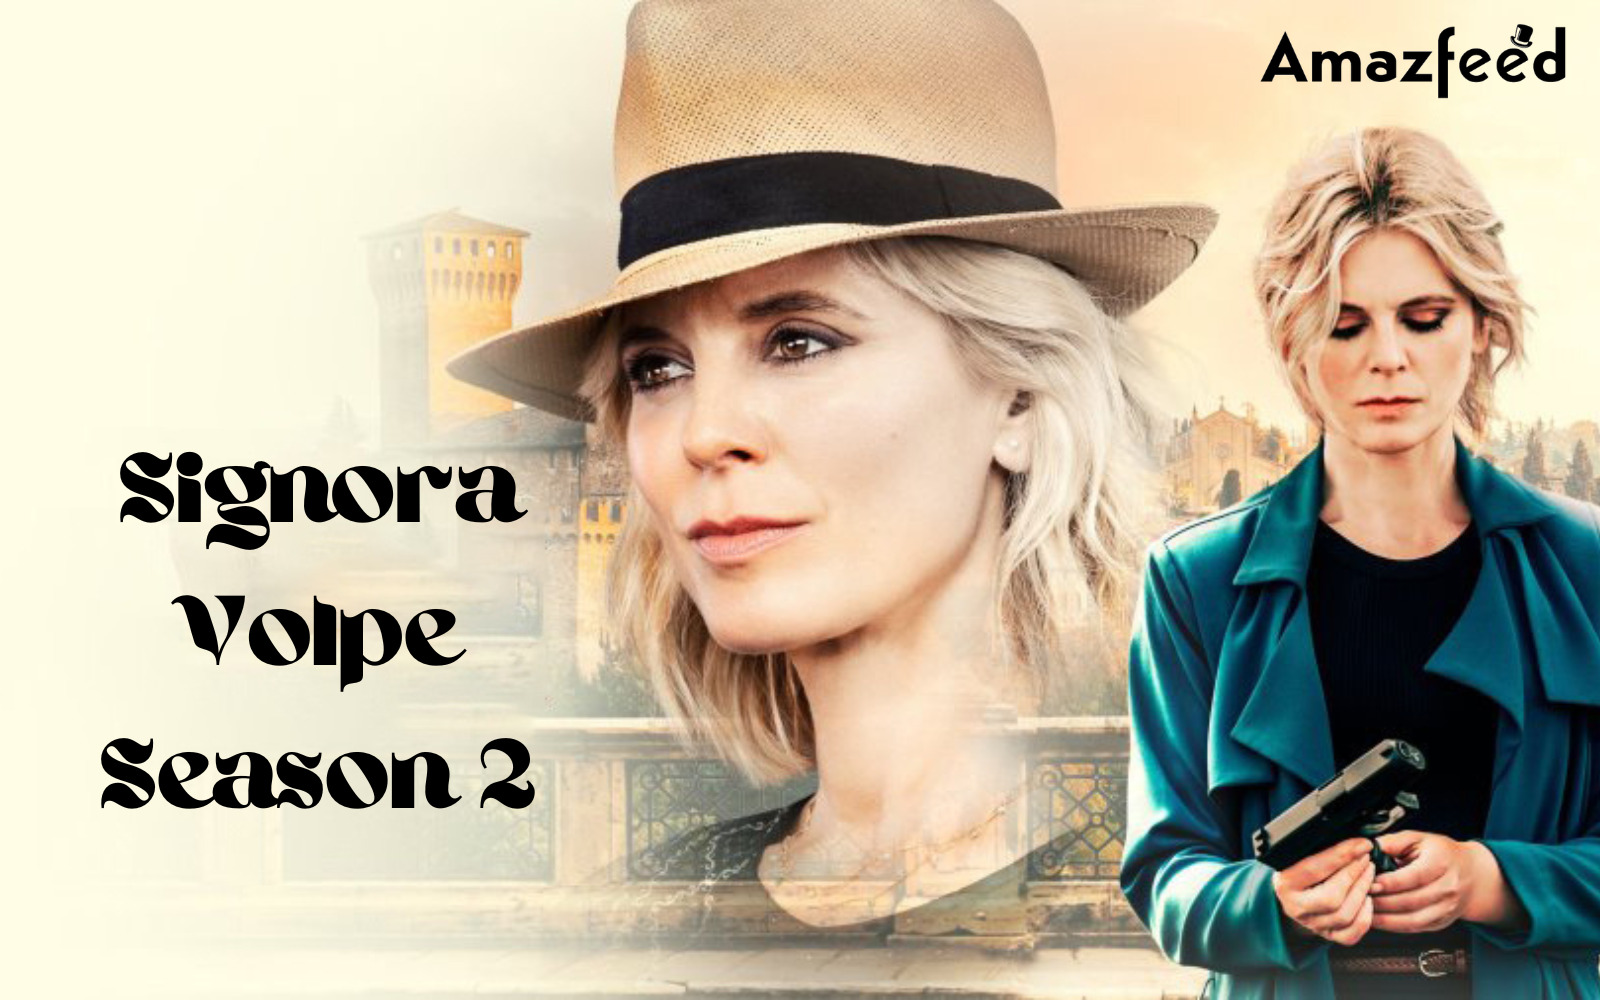 Signora Volpe season 2 Rating And Review